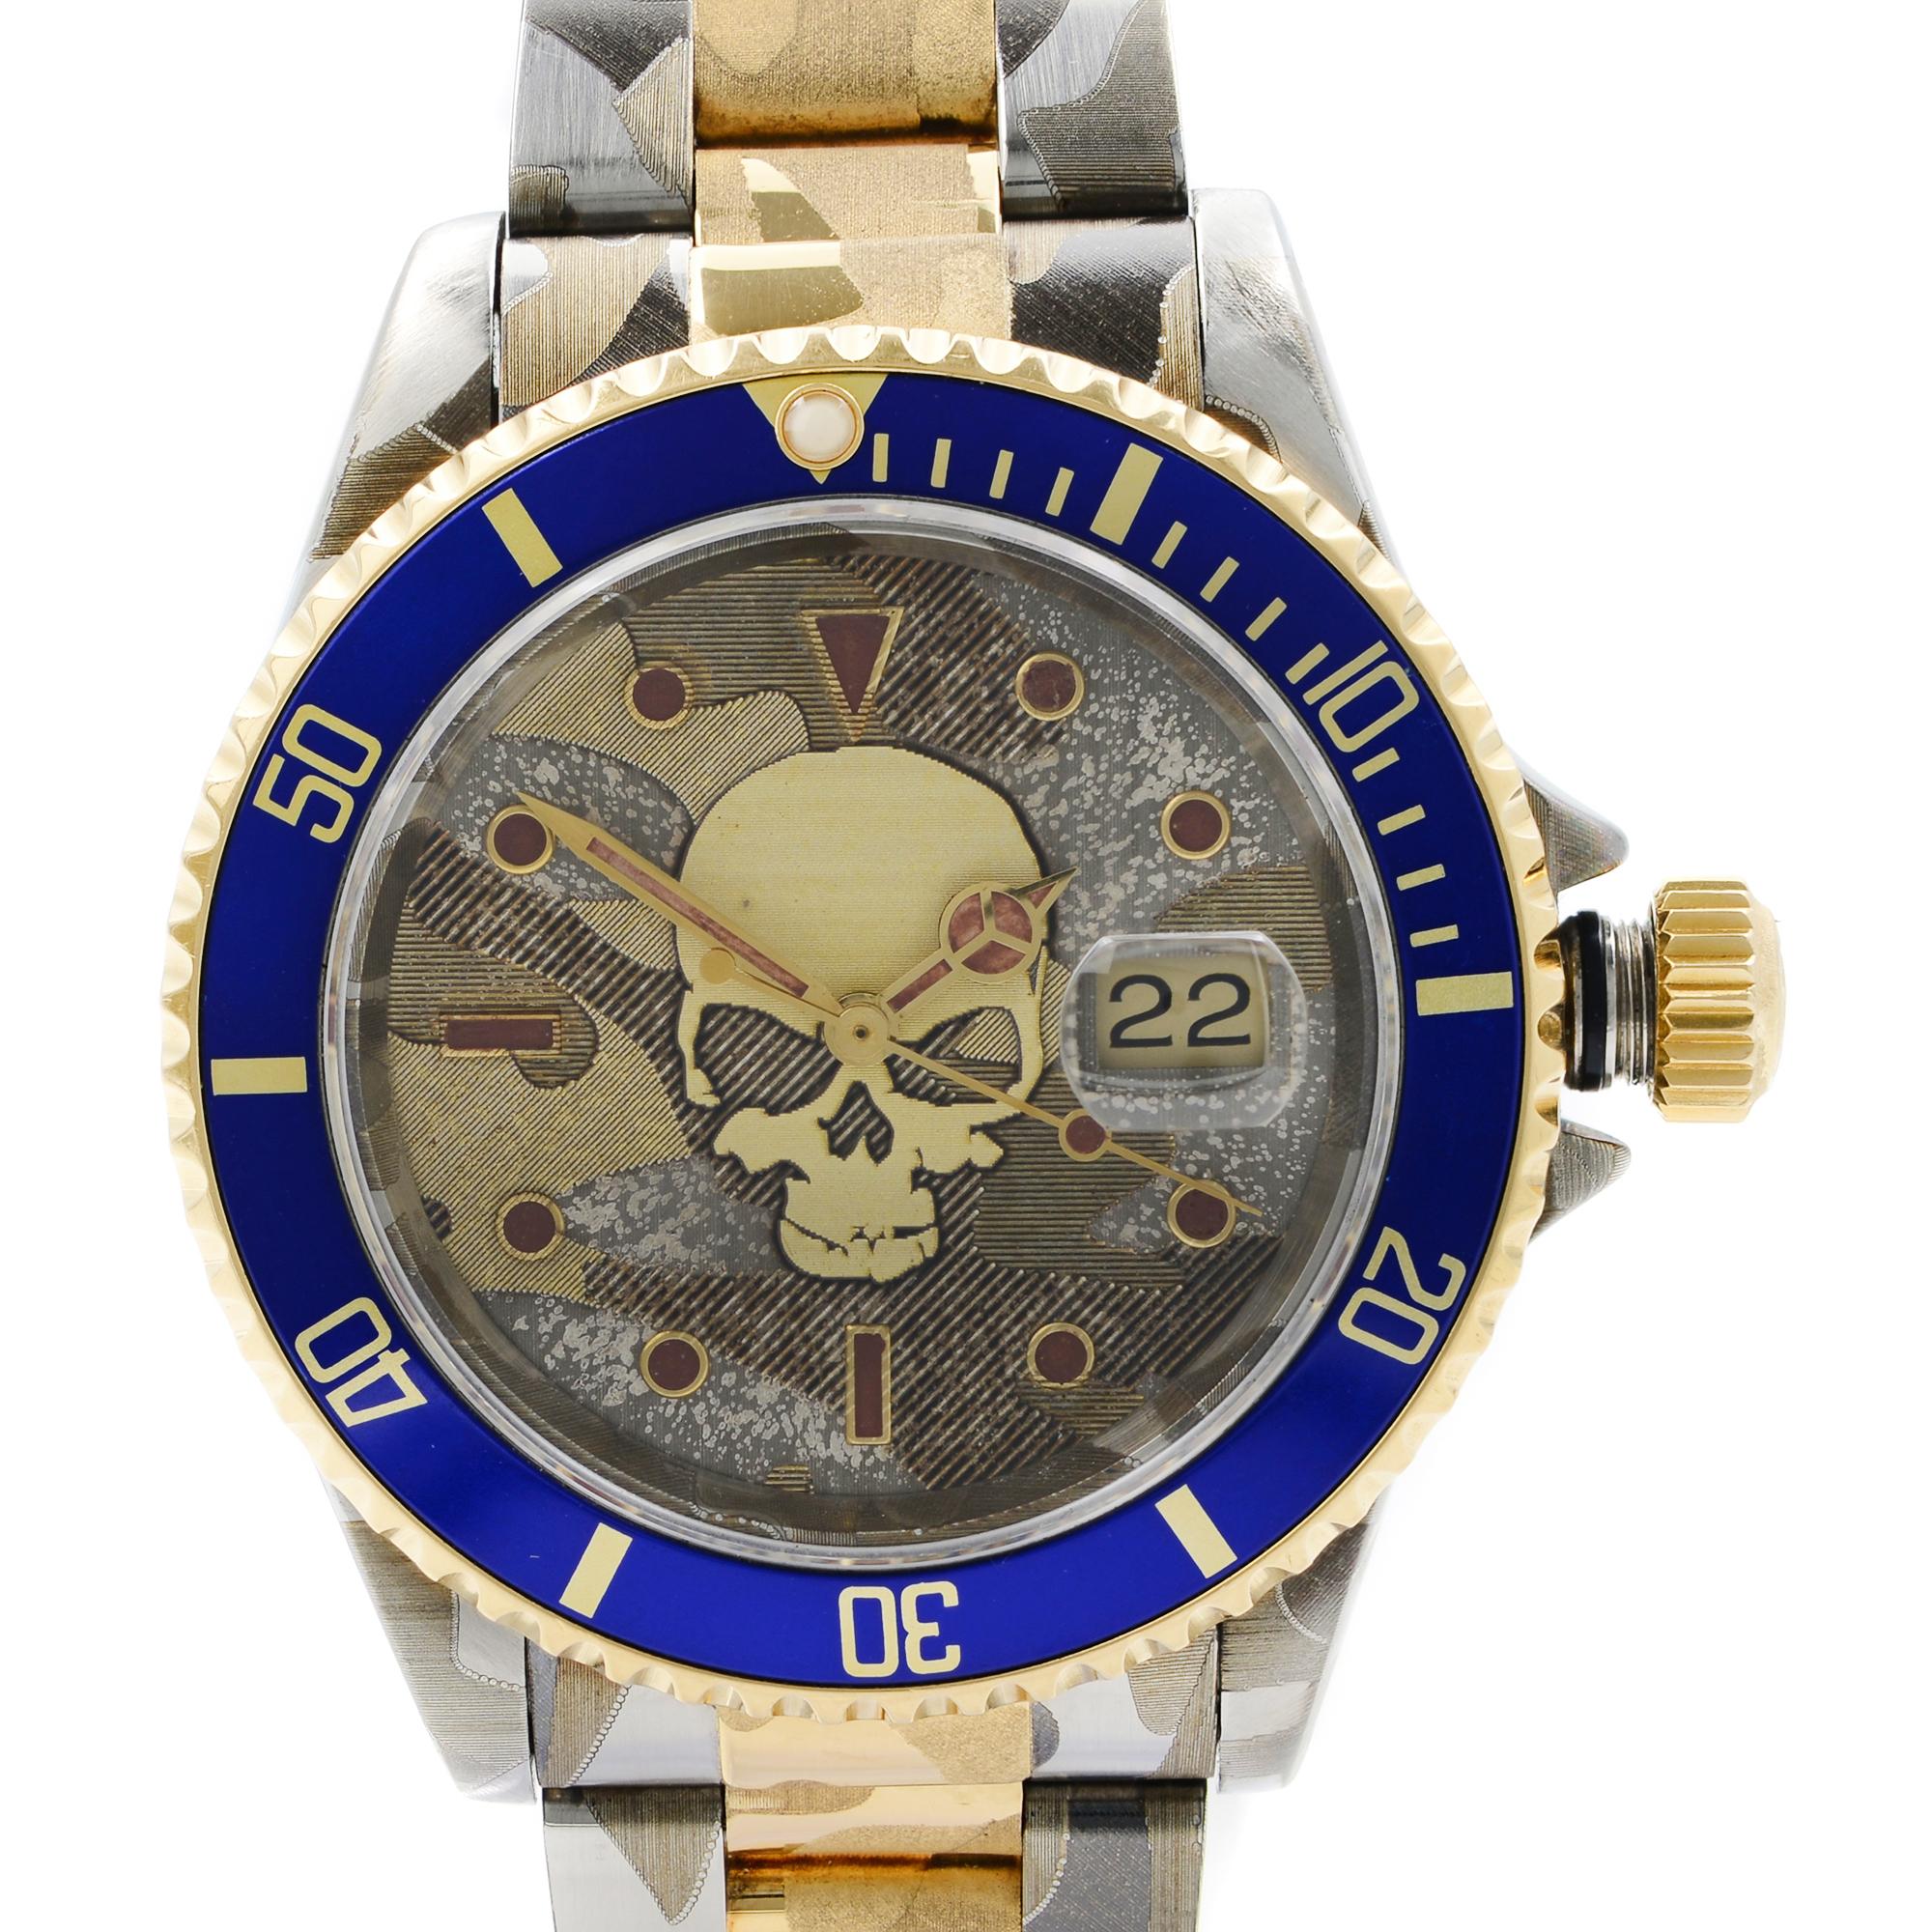 Custom camouflage on dial and bracelet. Has a few hairline scratches on blue bezel insert. Original Box and Papers are not included comes with a Chronostore presentation box and authenticity card.
Details:
Brand Rolex
Department Men
Model Number